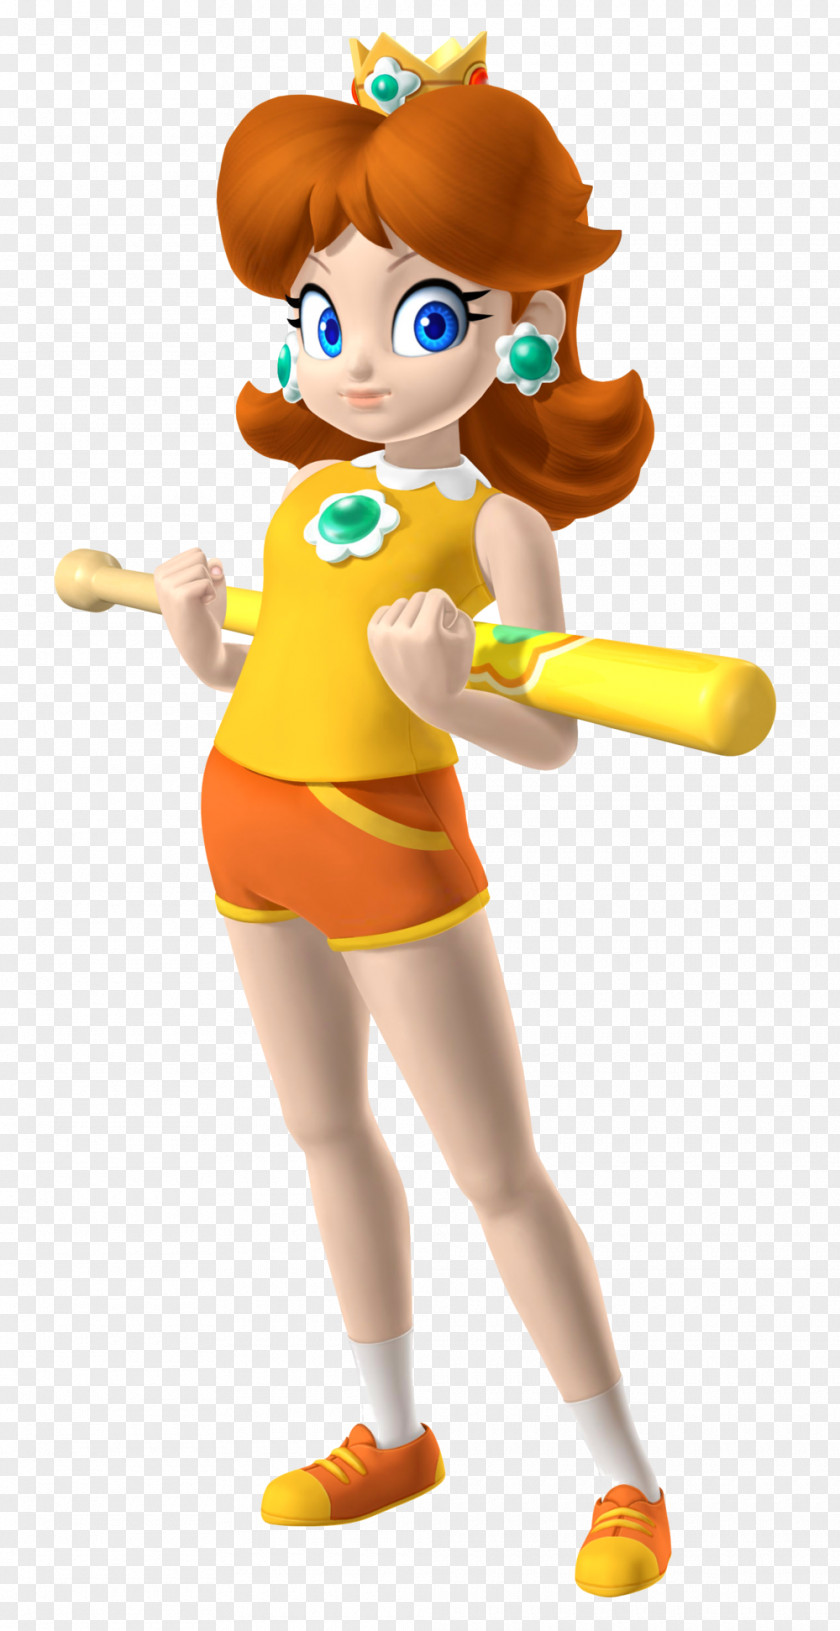 Daisy Mario & Sonic At The Olympic Games Sports Superstars Princess Mix Peach PNG